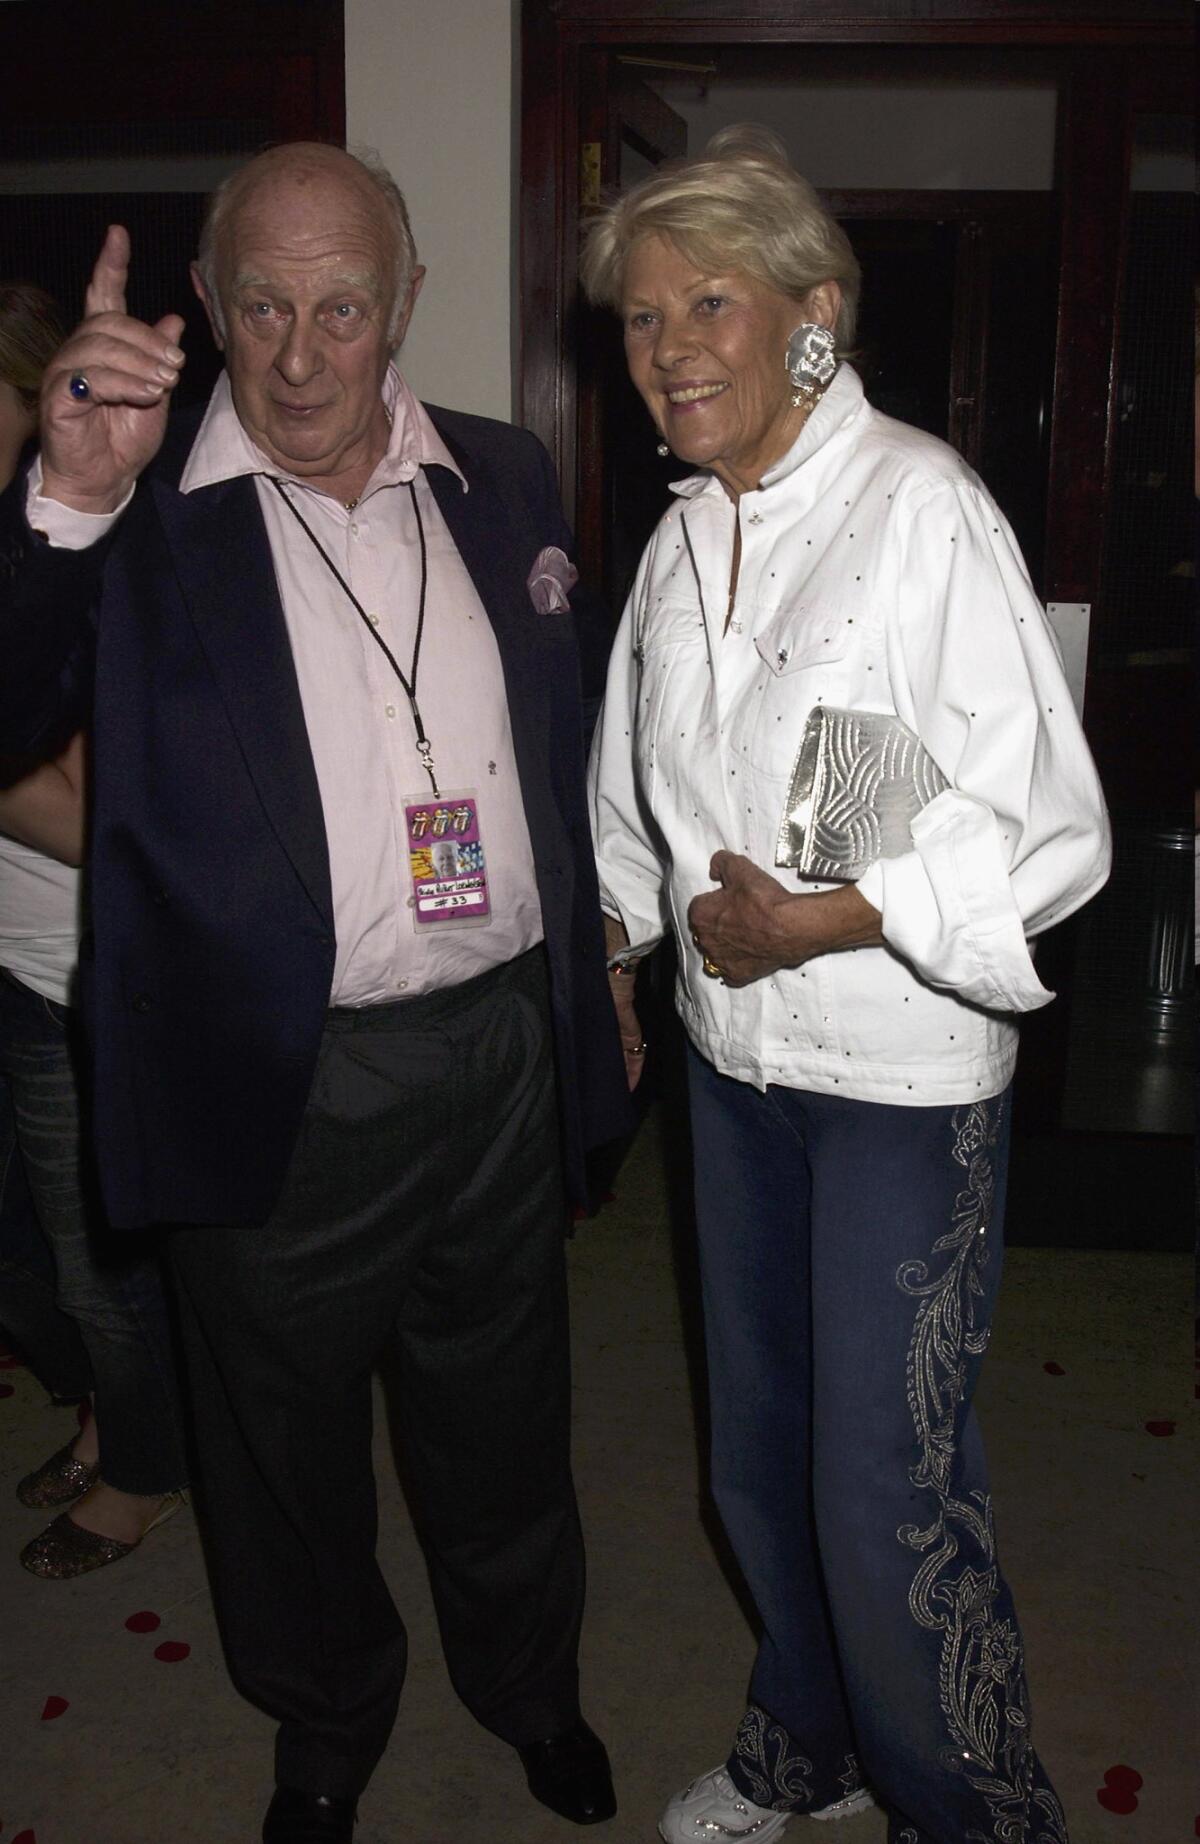 Prince Rupert Loewenstein and his wife attend the 2003 Rolling Stones end of tour party in London.